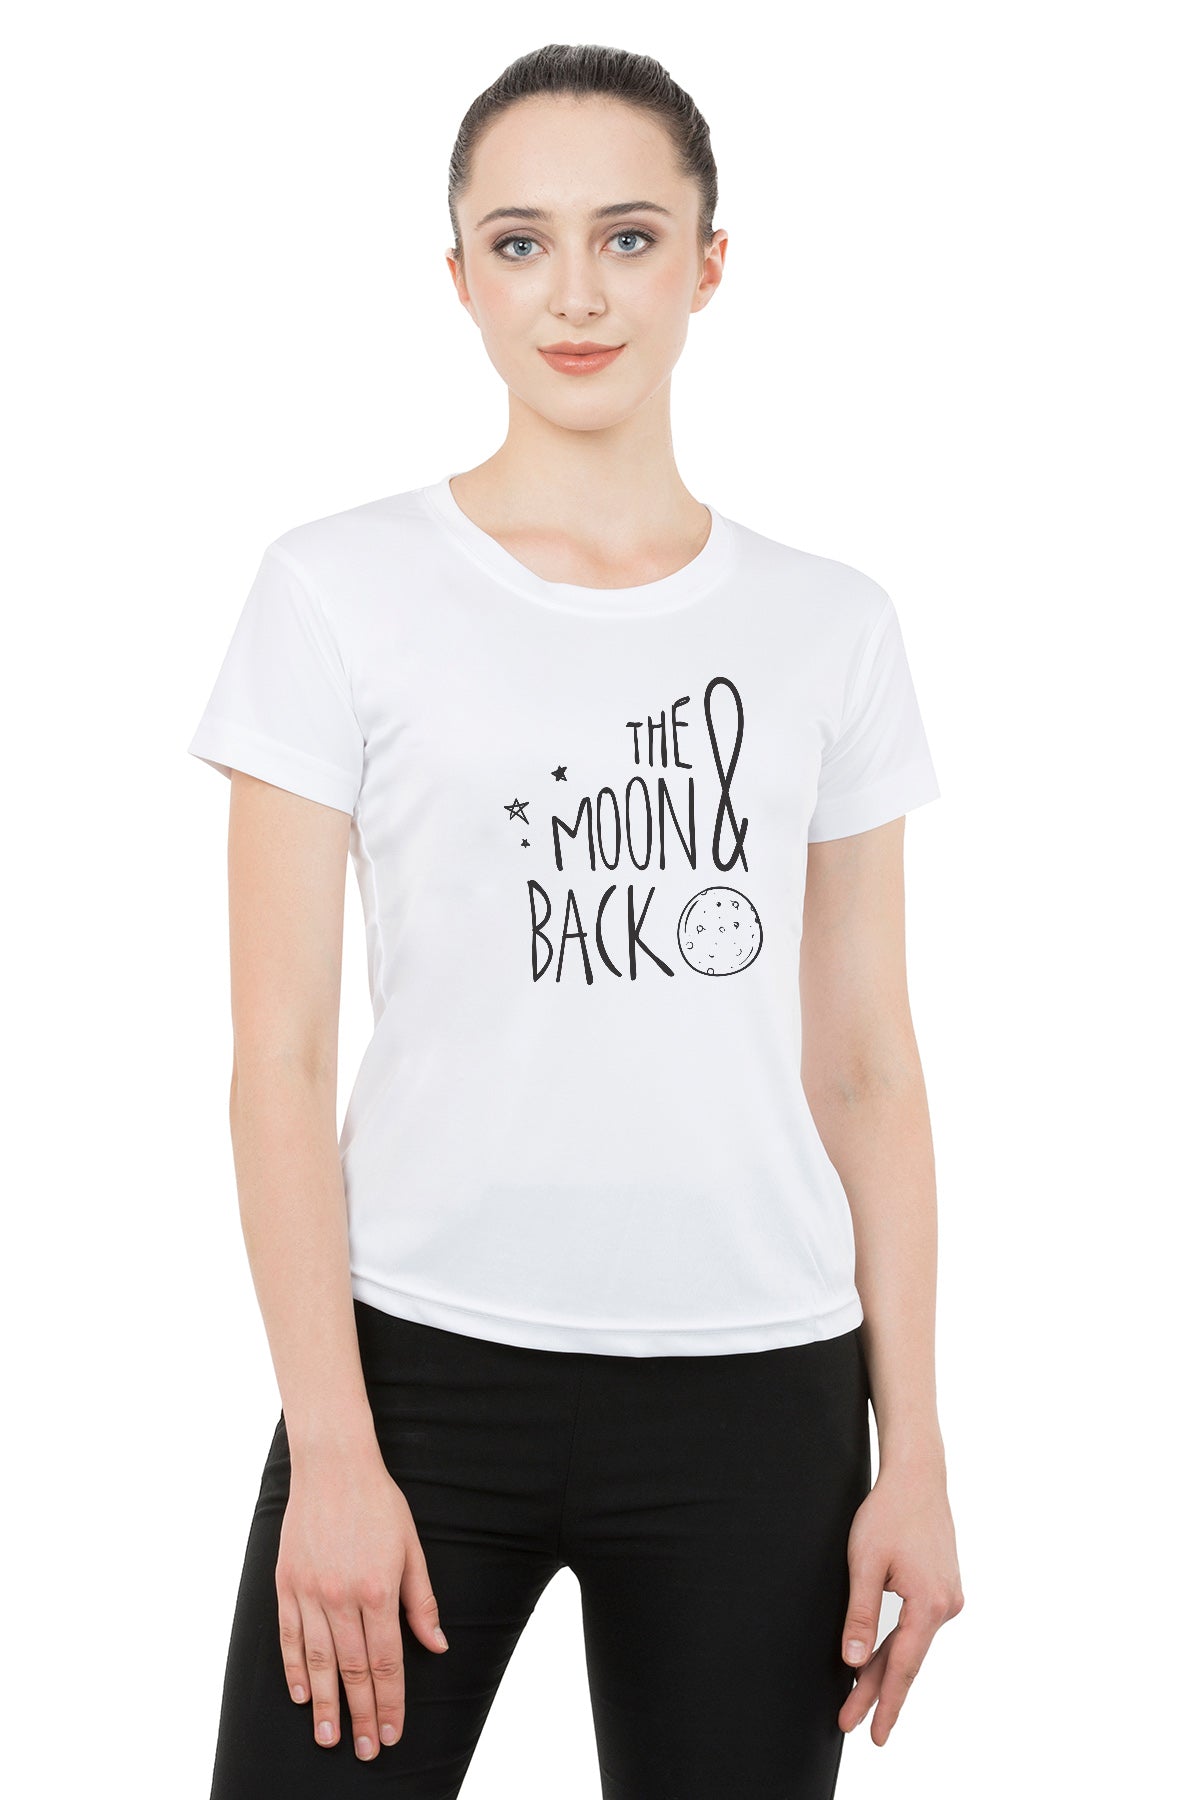 I love you to the moon & back matching Couple T shirts- White